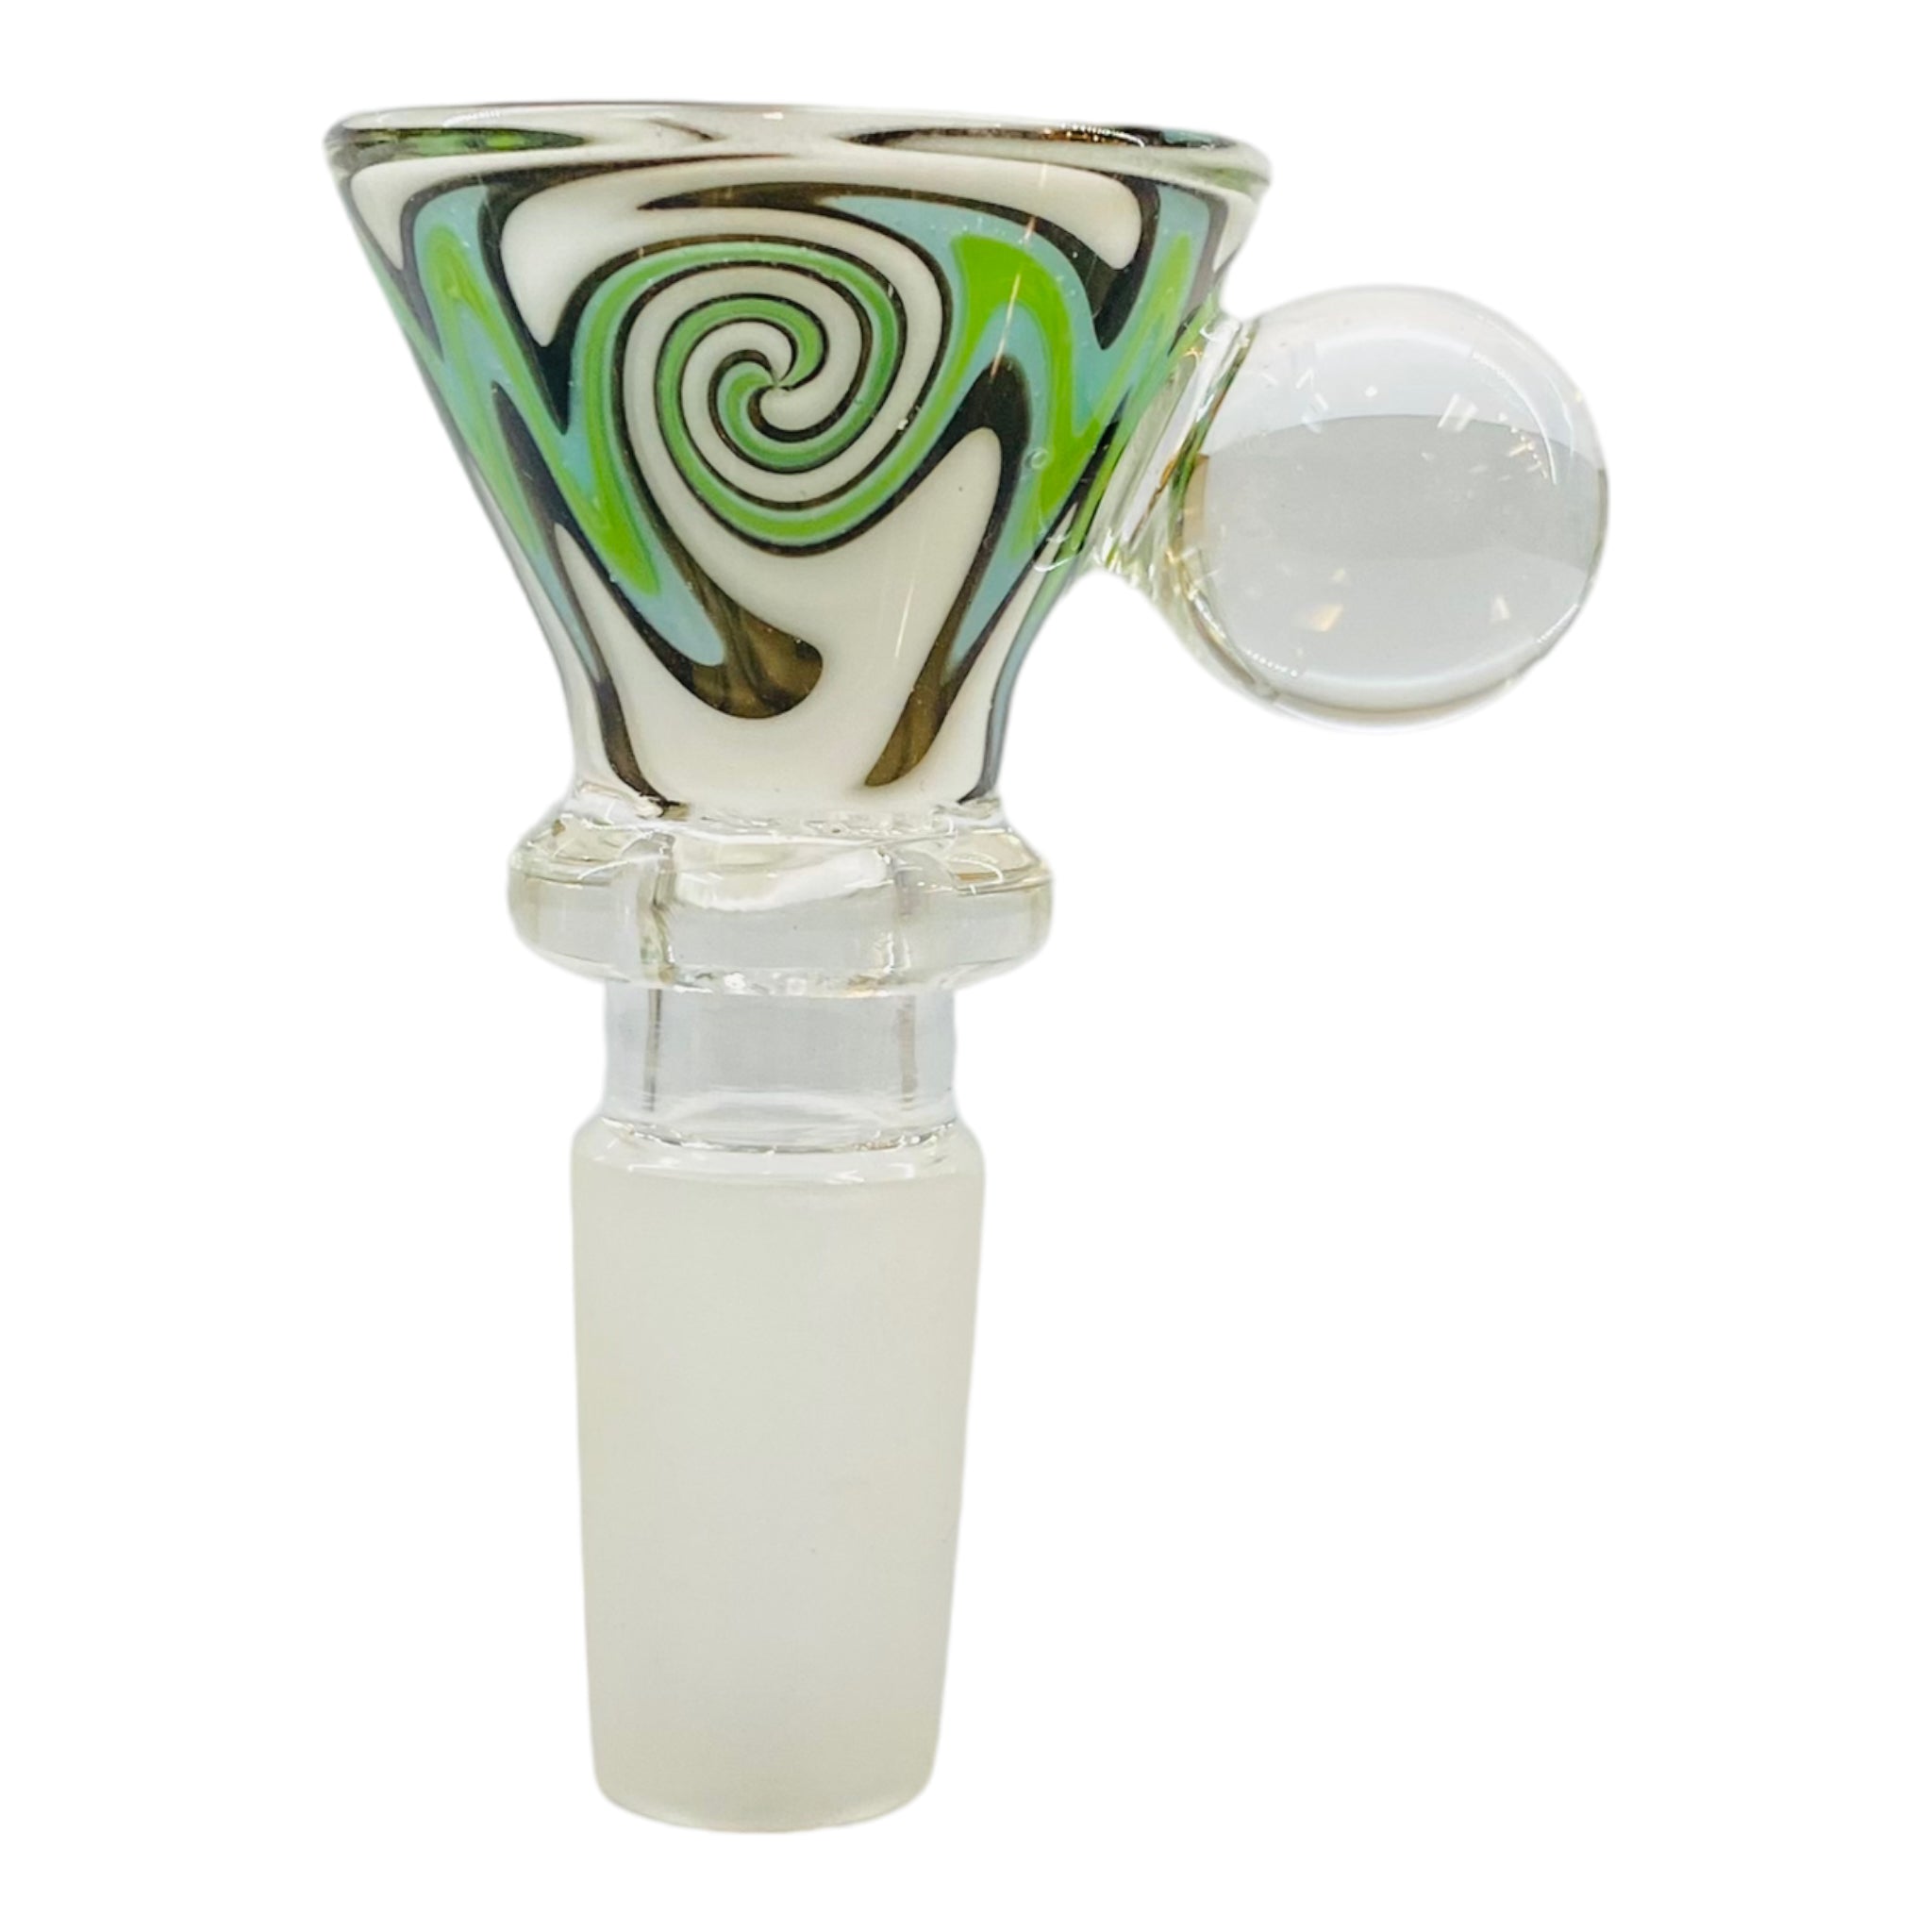 14mm Flower Bowl - Wig Wag Martini Bowl With Built In Honeycomb Screen - Green, Black, And White